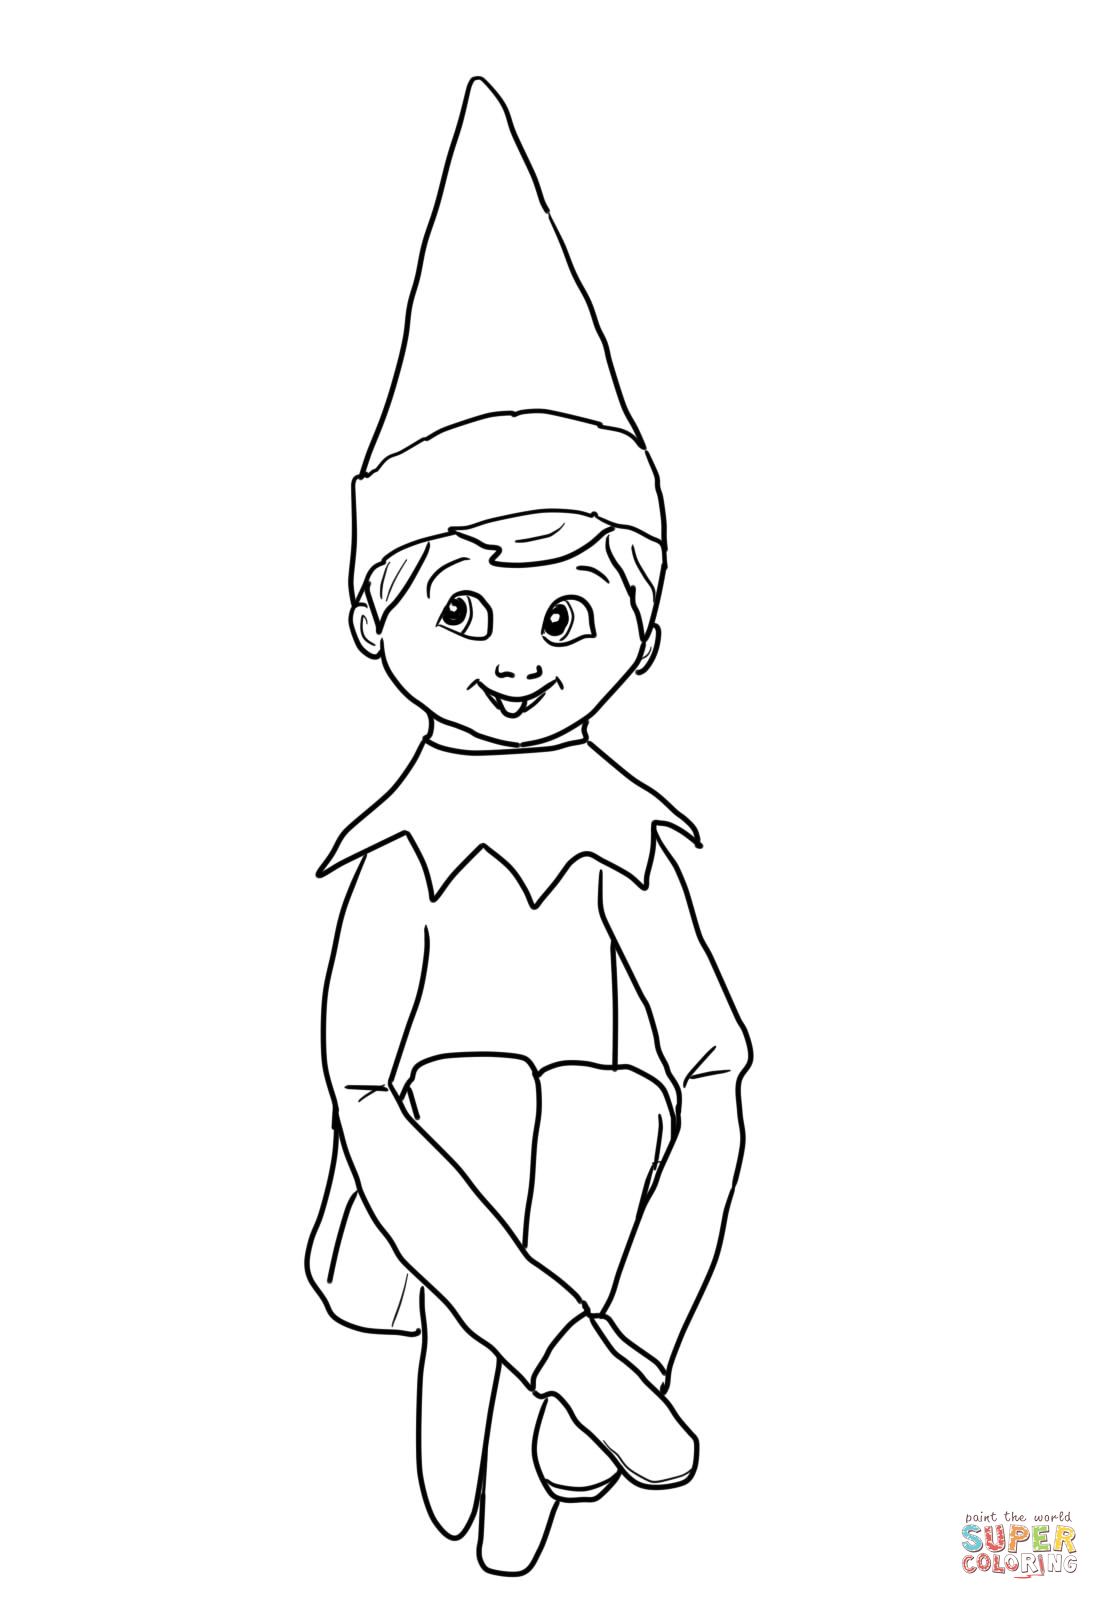 Elf On The Shelf Coloring Pages Printable